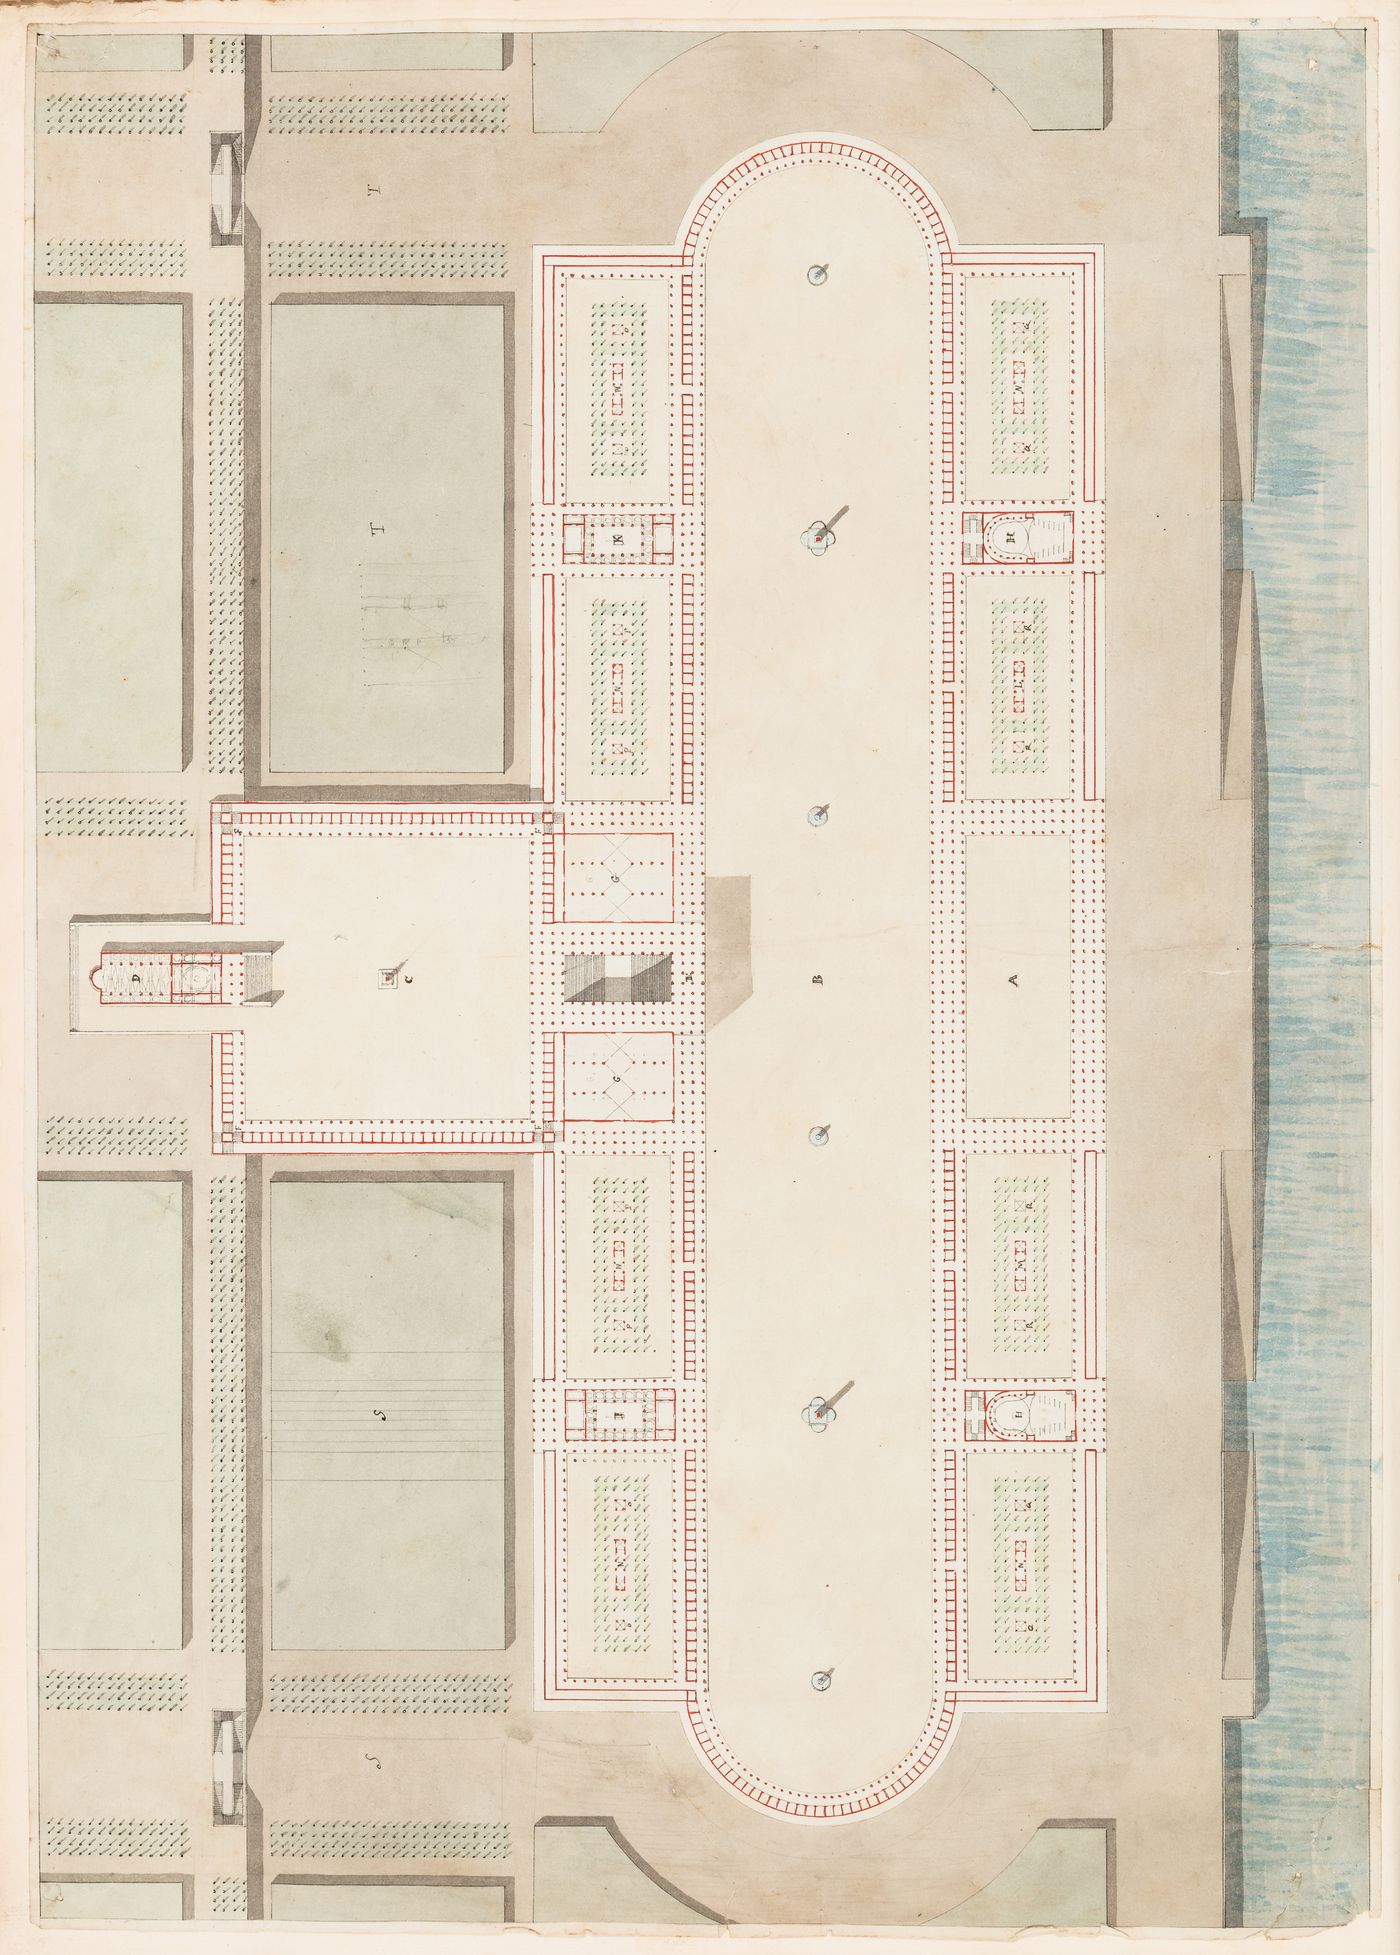 1802 Grand Prix Competition: Site plan for a public fair located on the banks of large river; verso: 1802 Grand Prix Competition: Plan for a public fair located on the banks of a large river